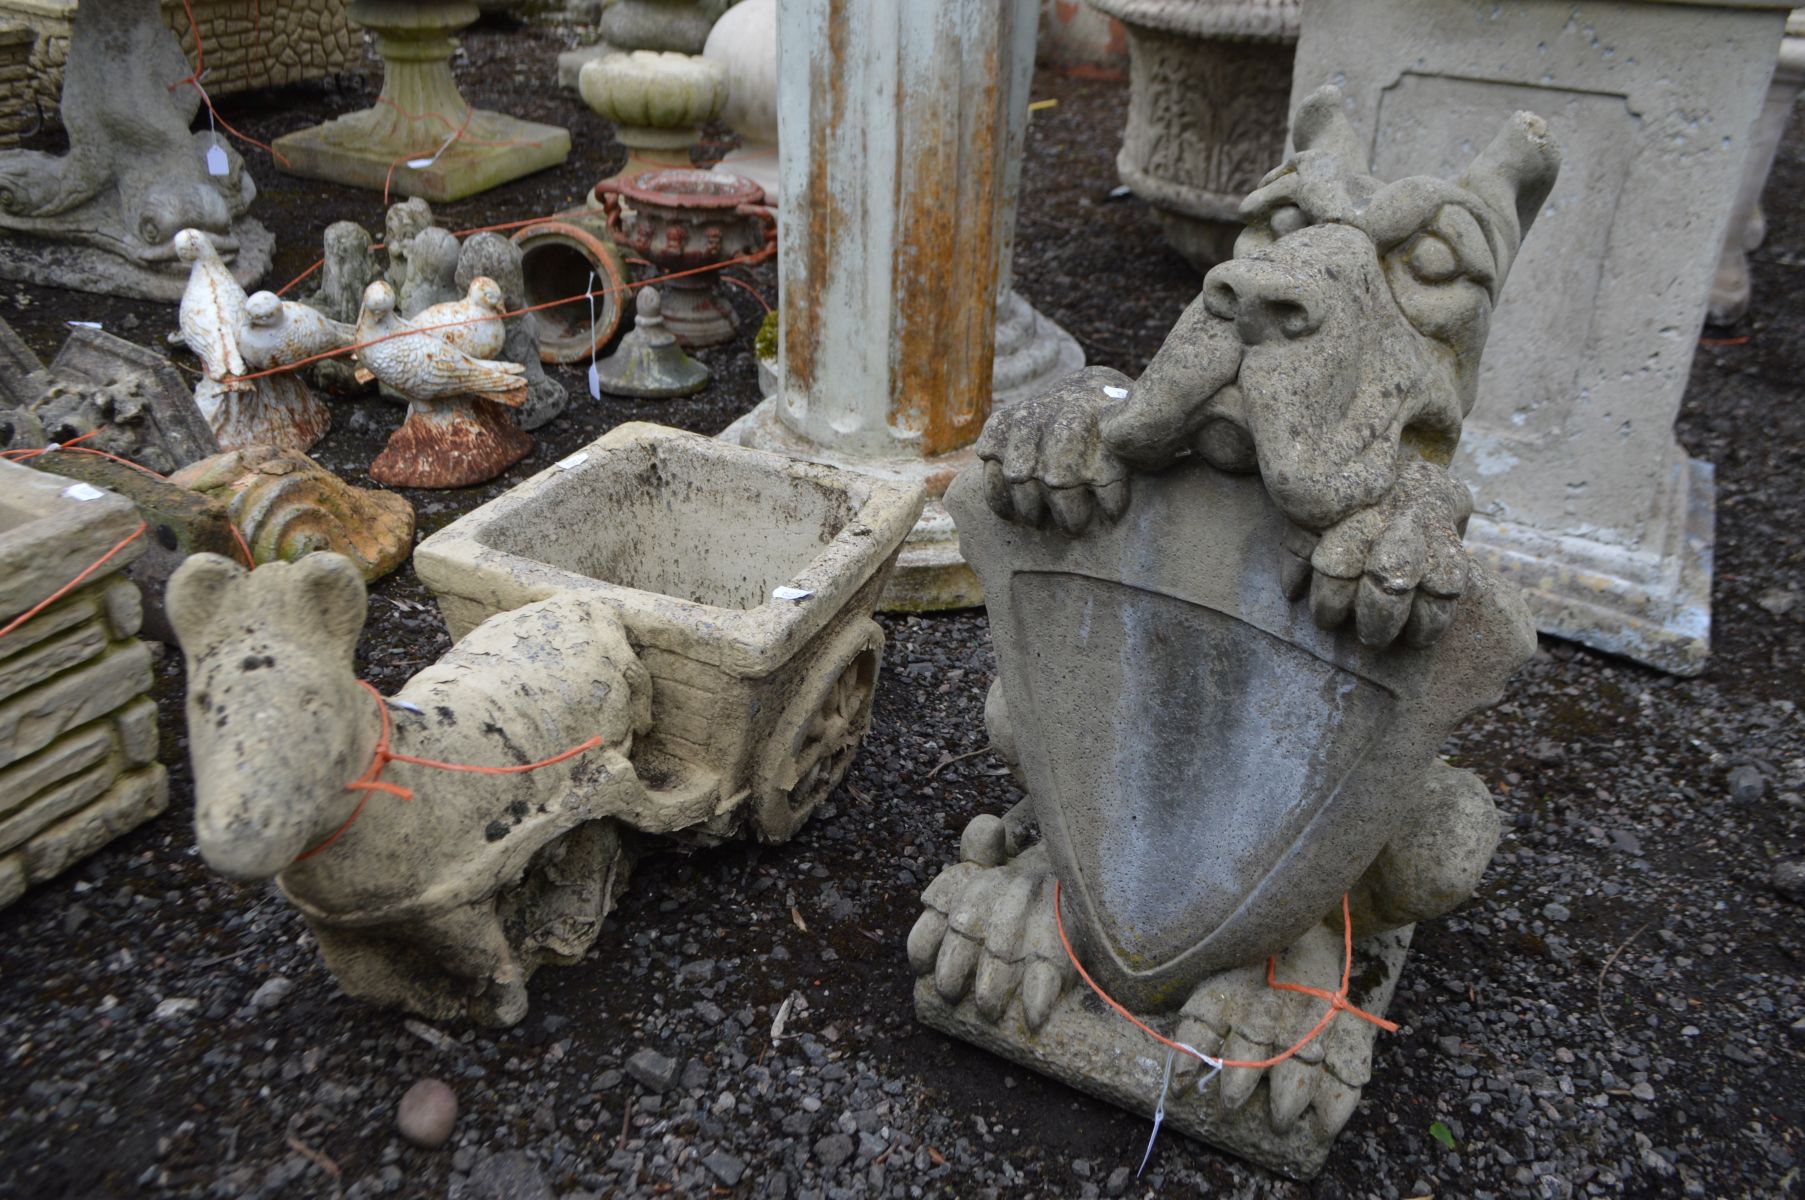 A COMPOSITE GARDEN FIGURE of a hound holding a shield, along with a composite planter of a donkey